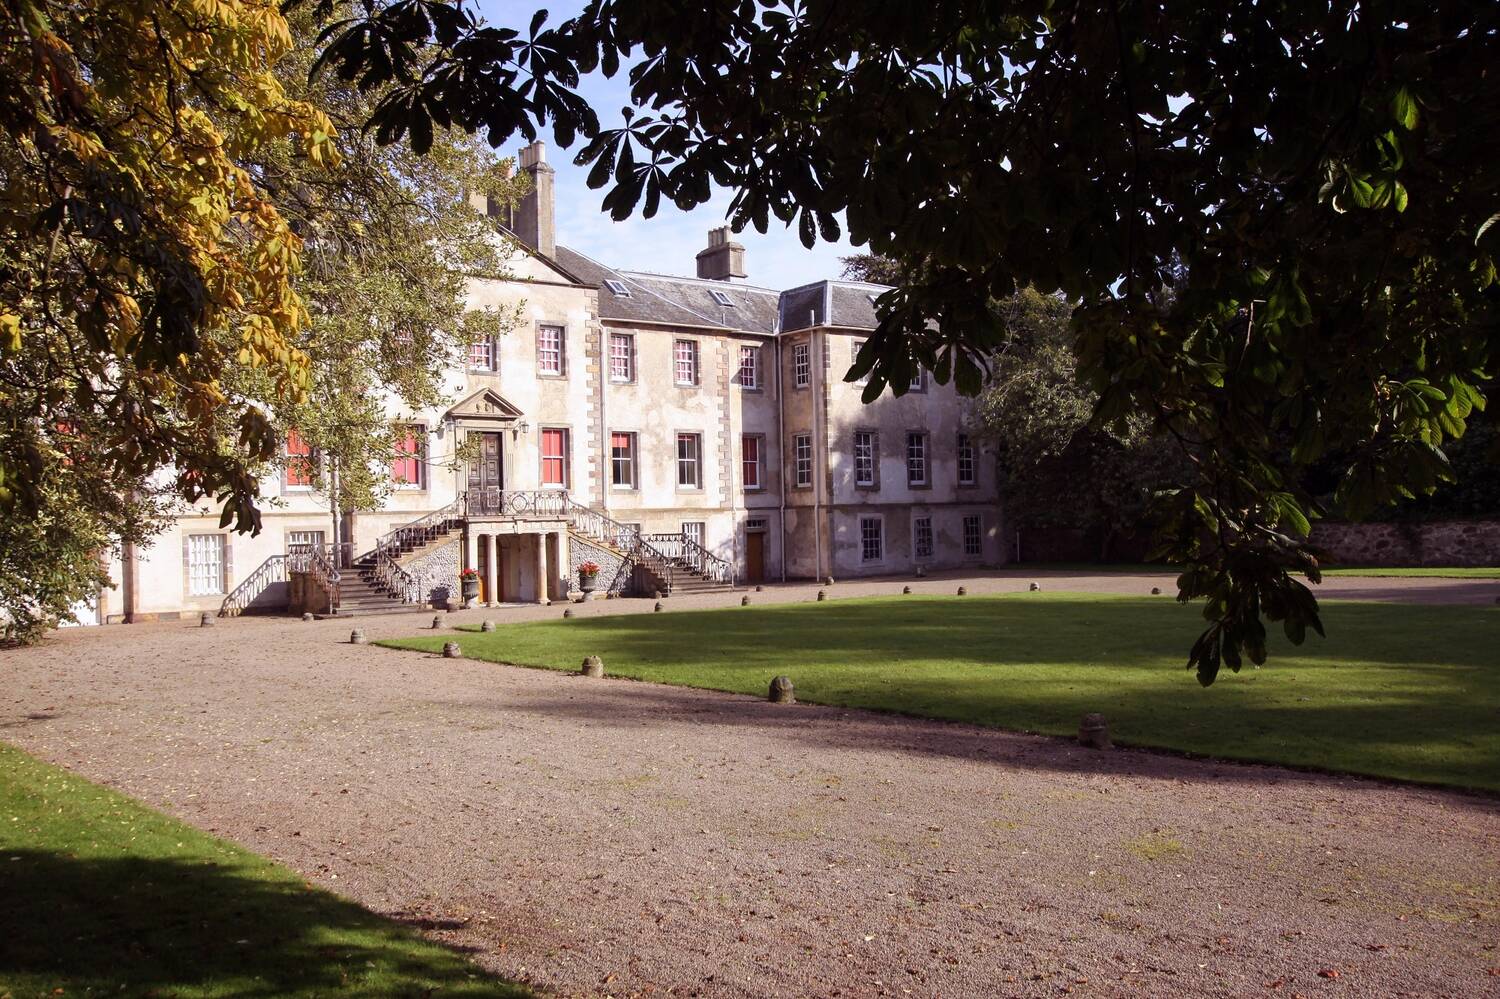 A view of the grand exterior of Newhailes House, seen from beneath leafy horse chestnut trees. A large gravel drive sweeps up to the stone entrance staircase.